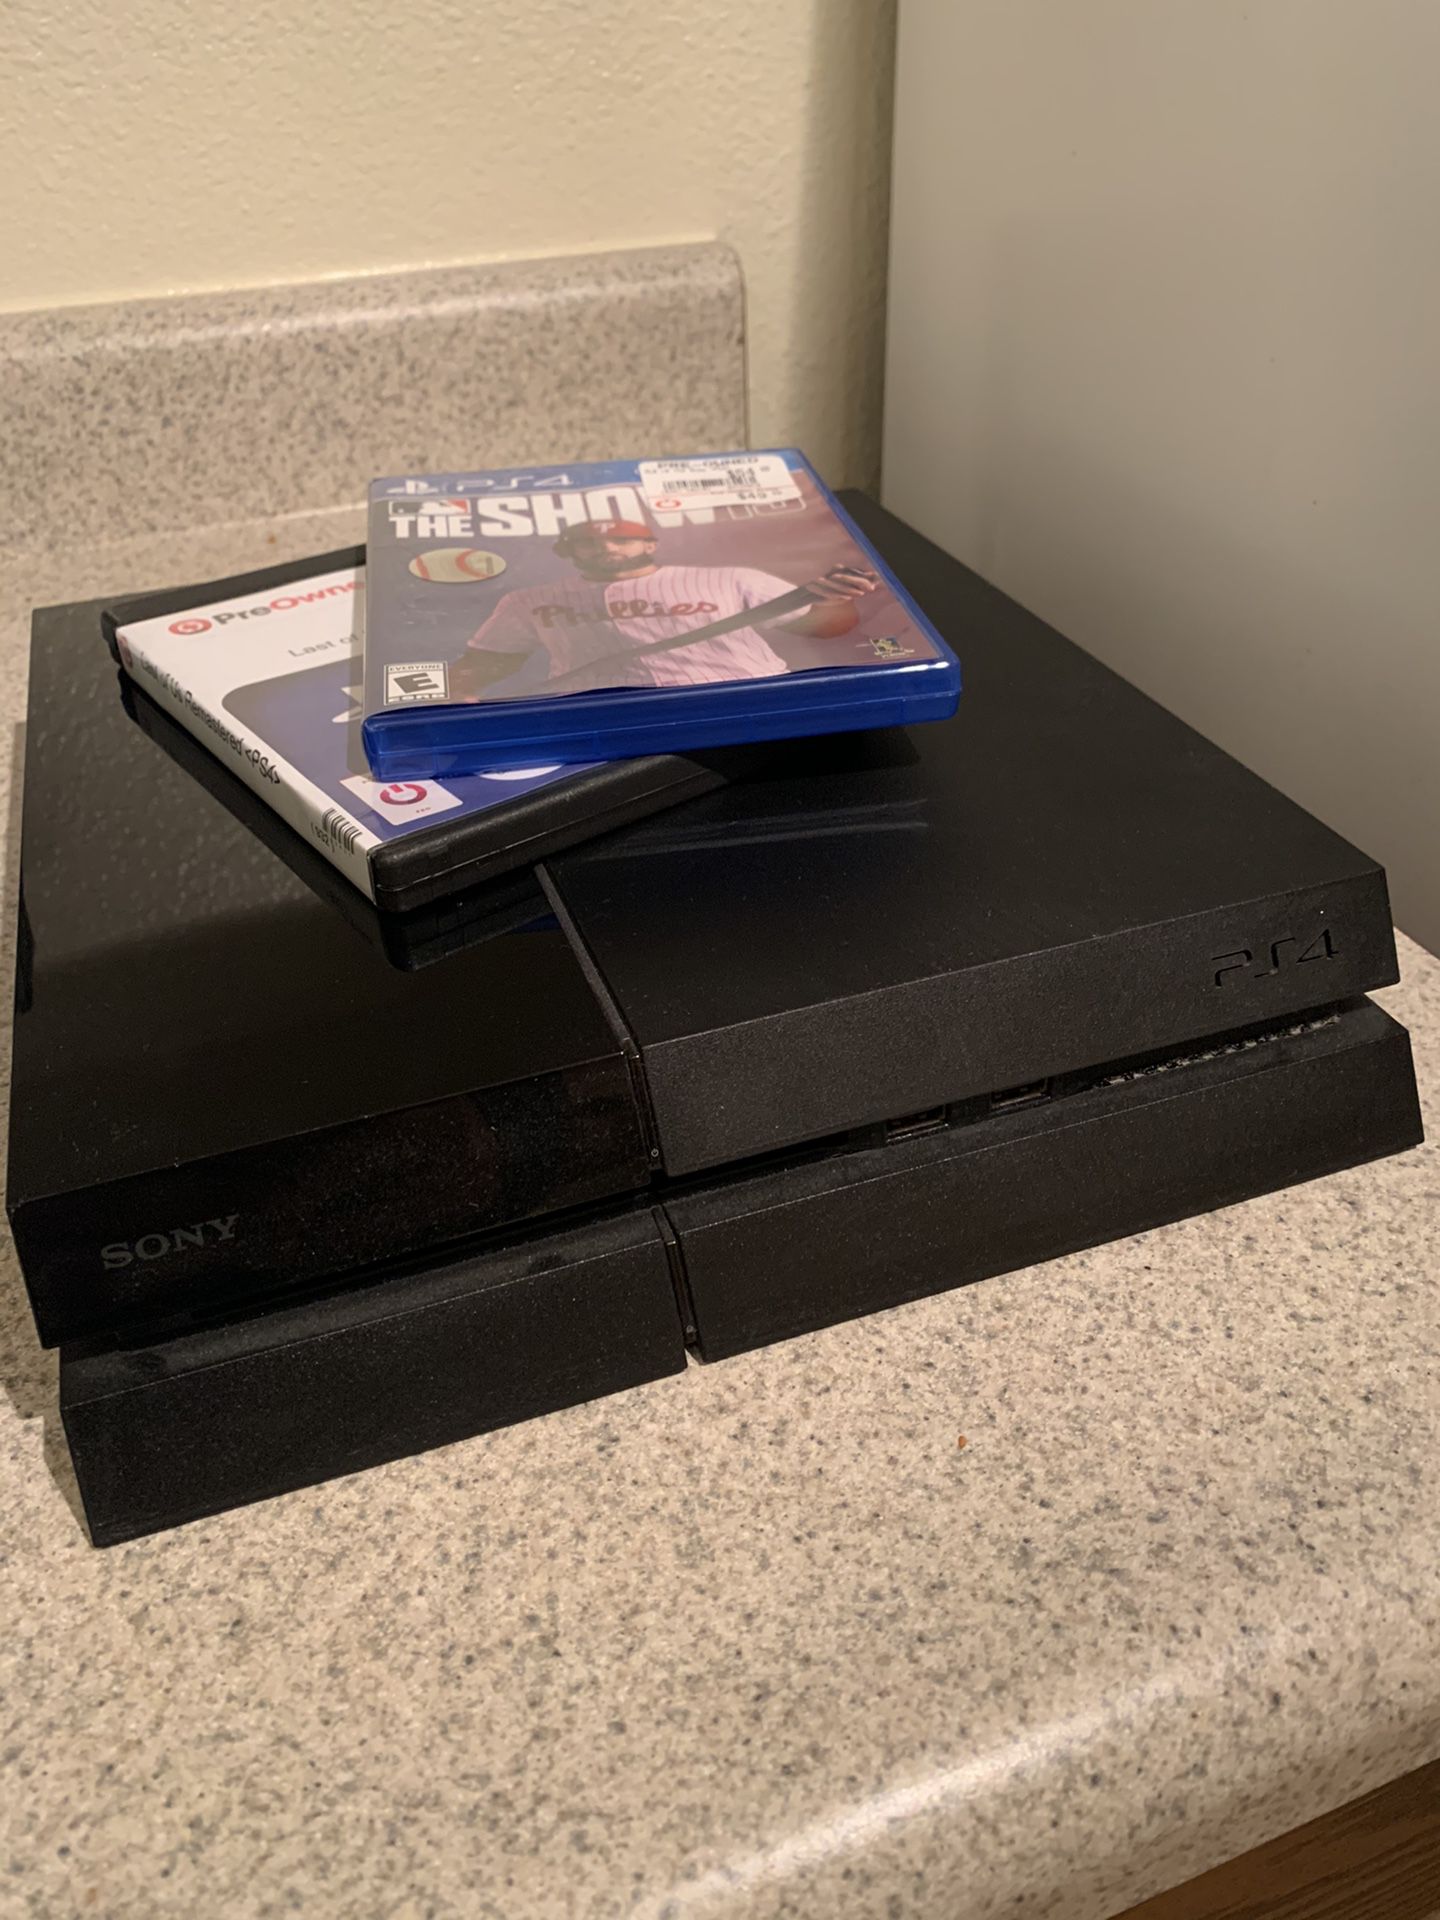 PS4, 2 controllers, & 2 games